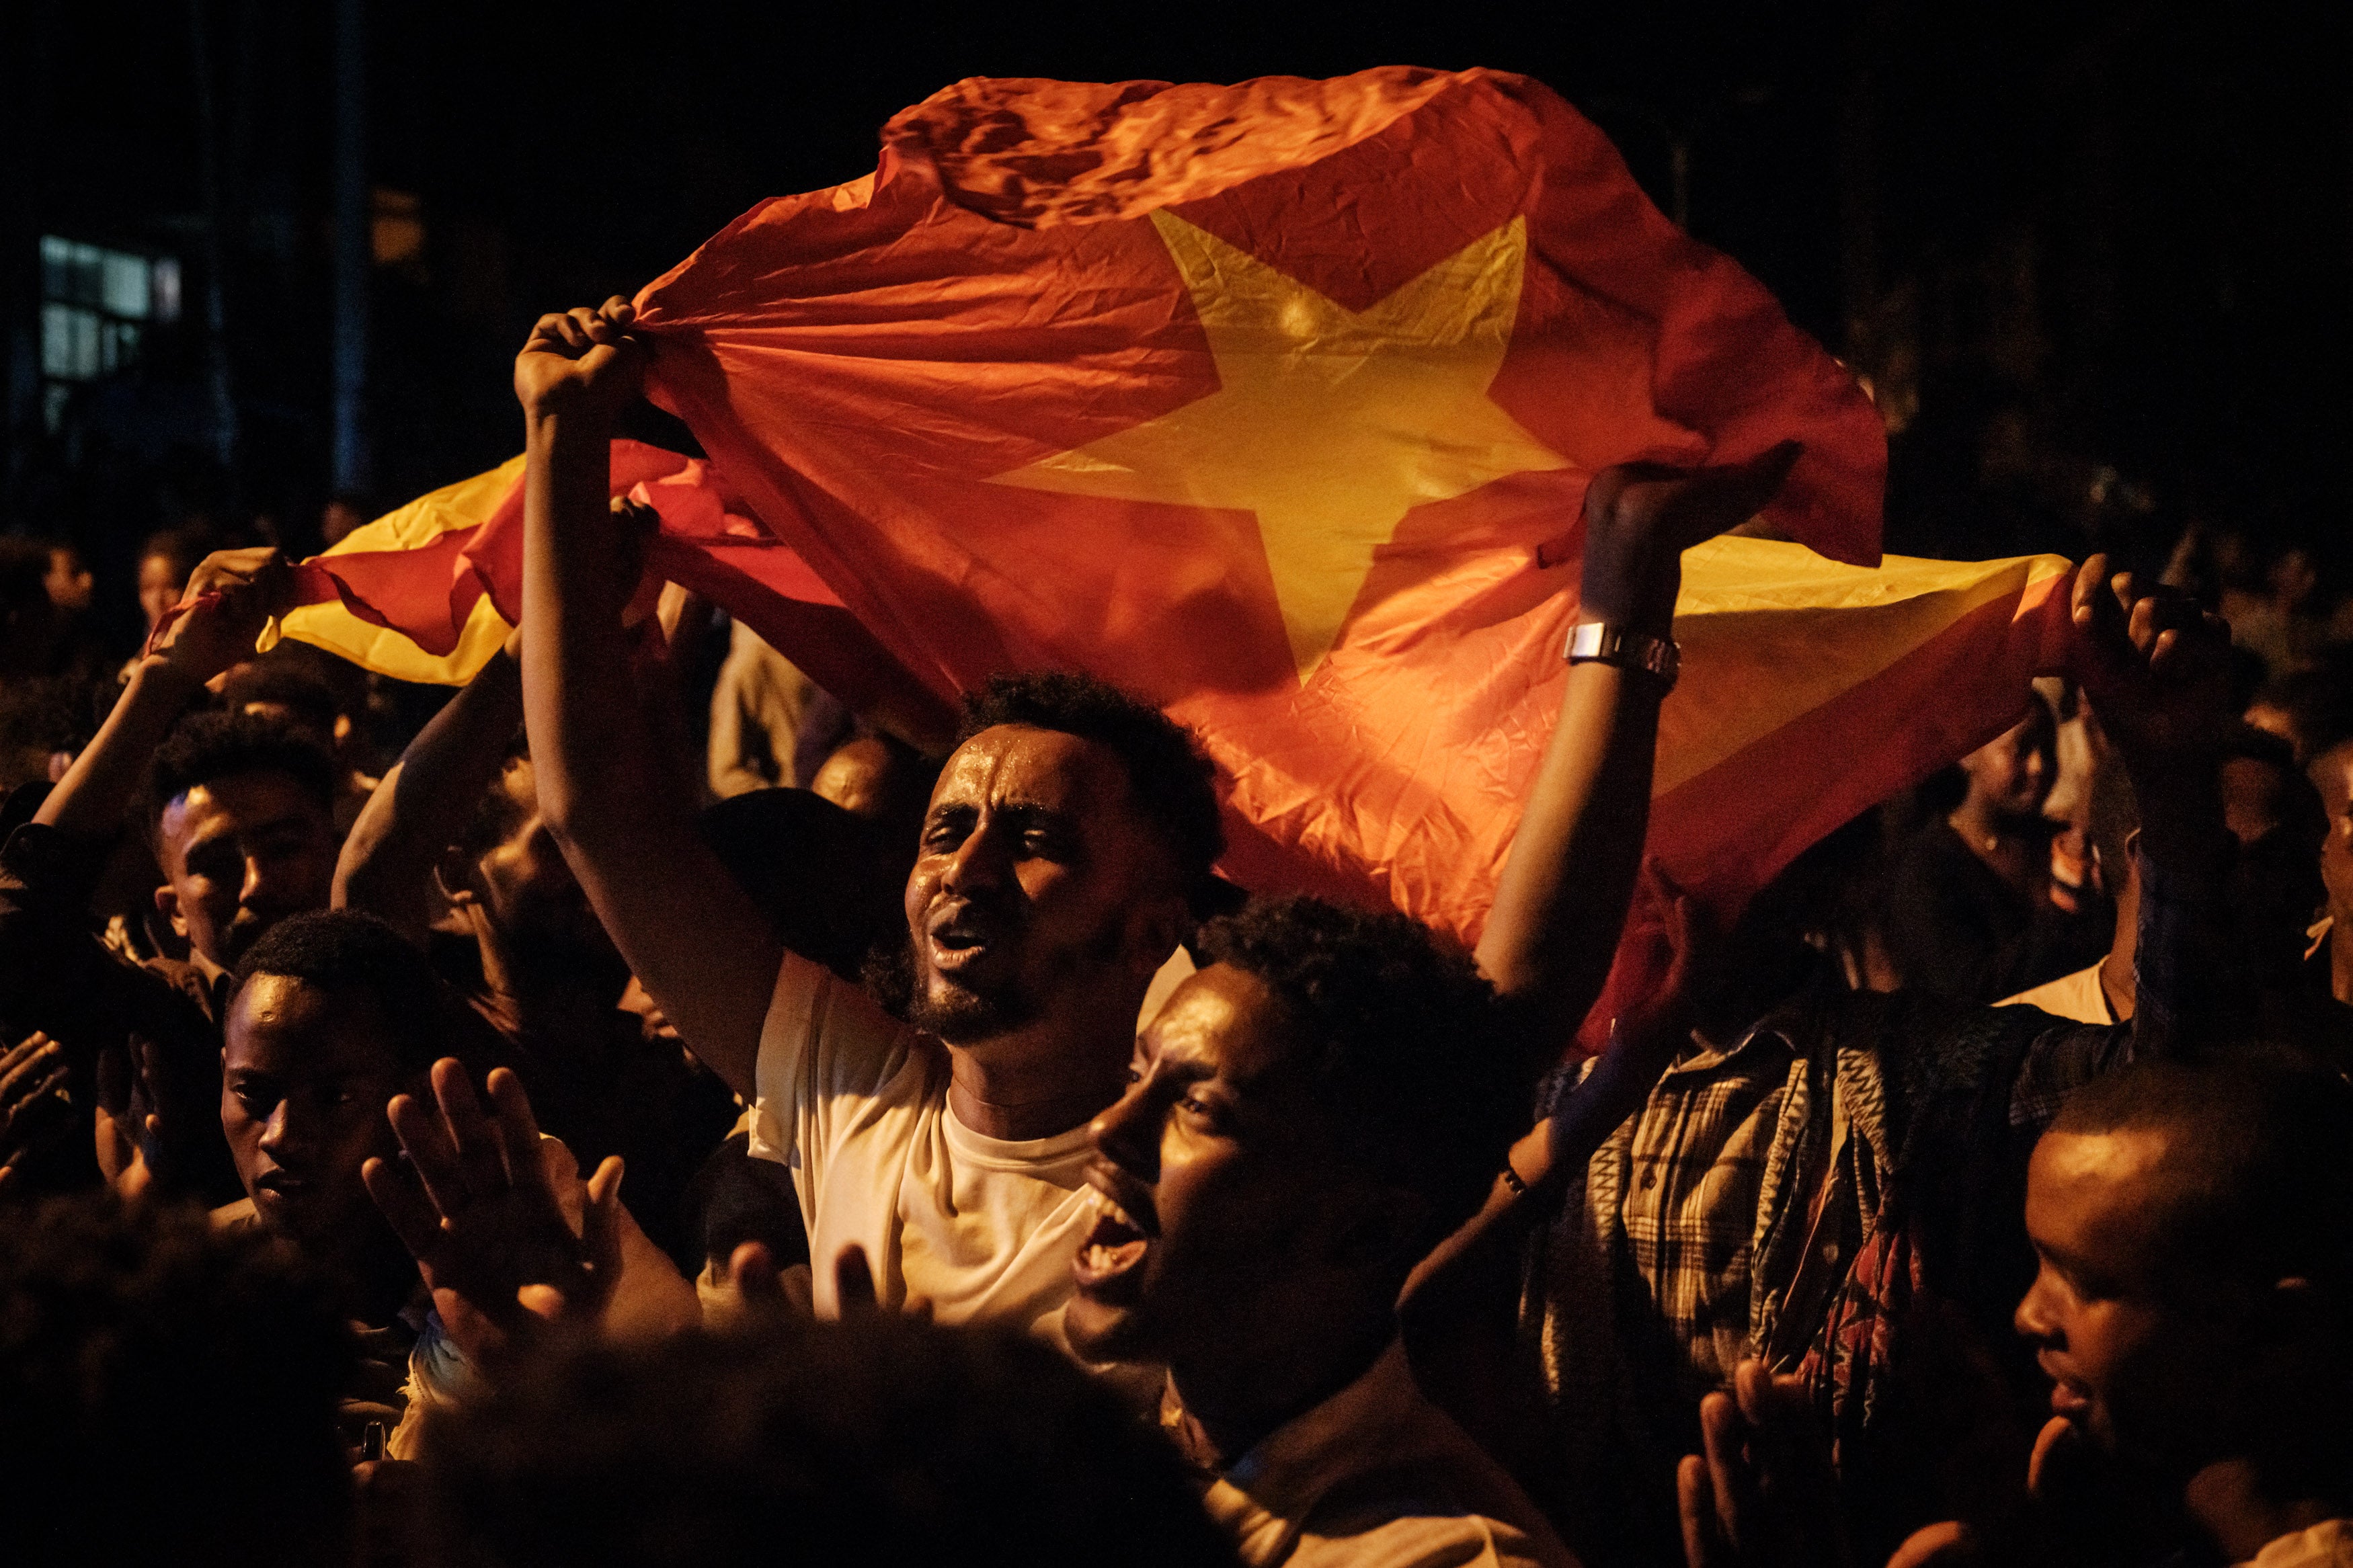 Over the past decade, democracy has been quickly reversed in places such as Tigray